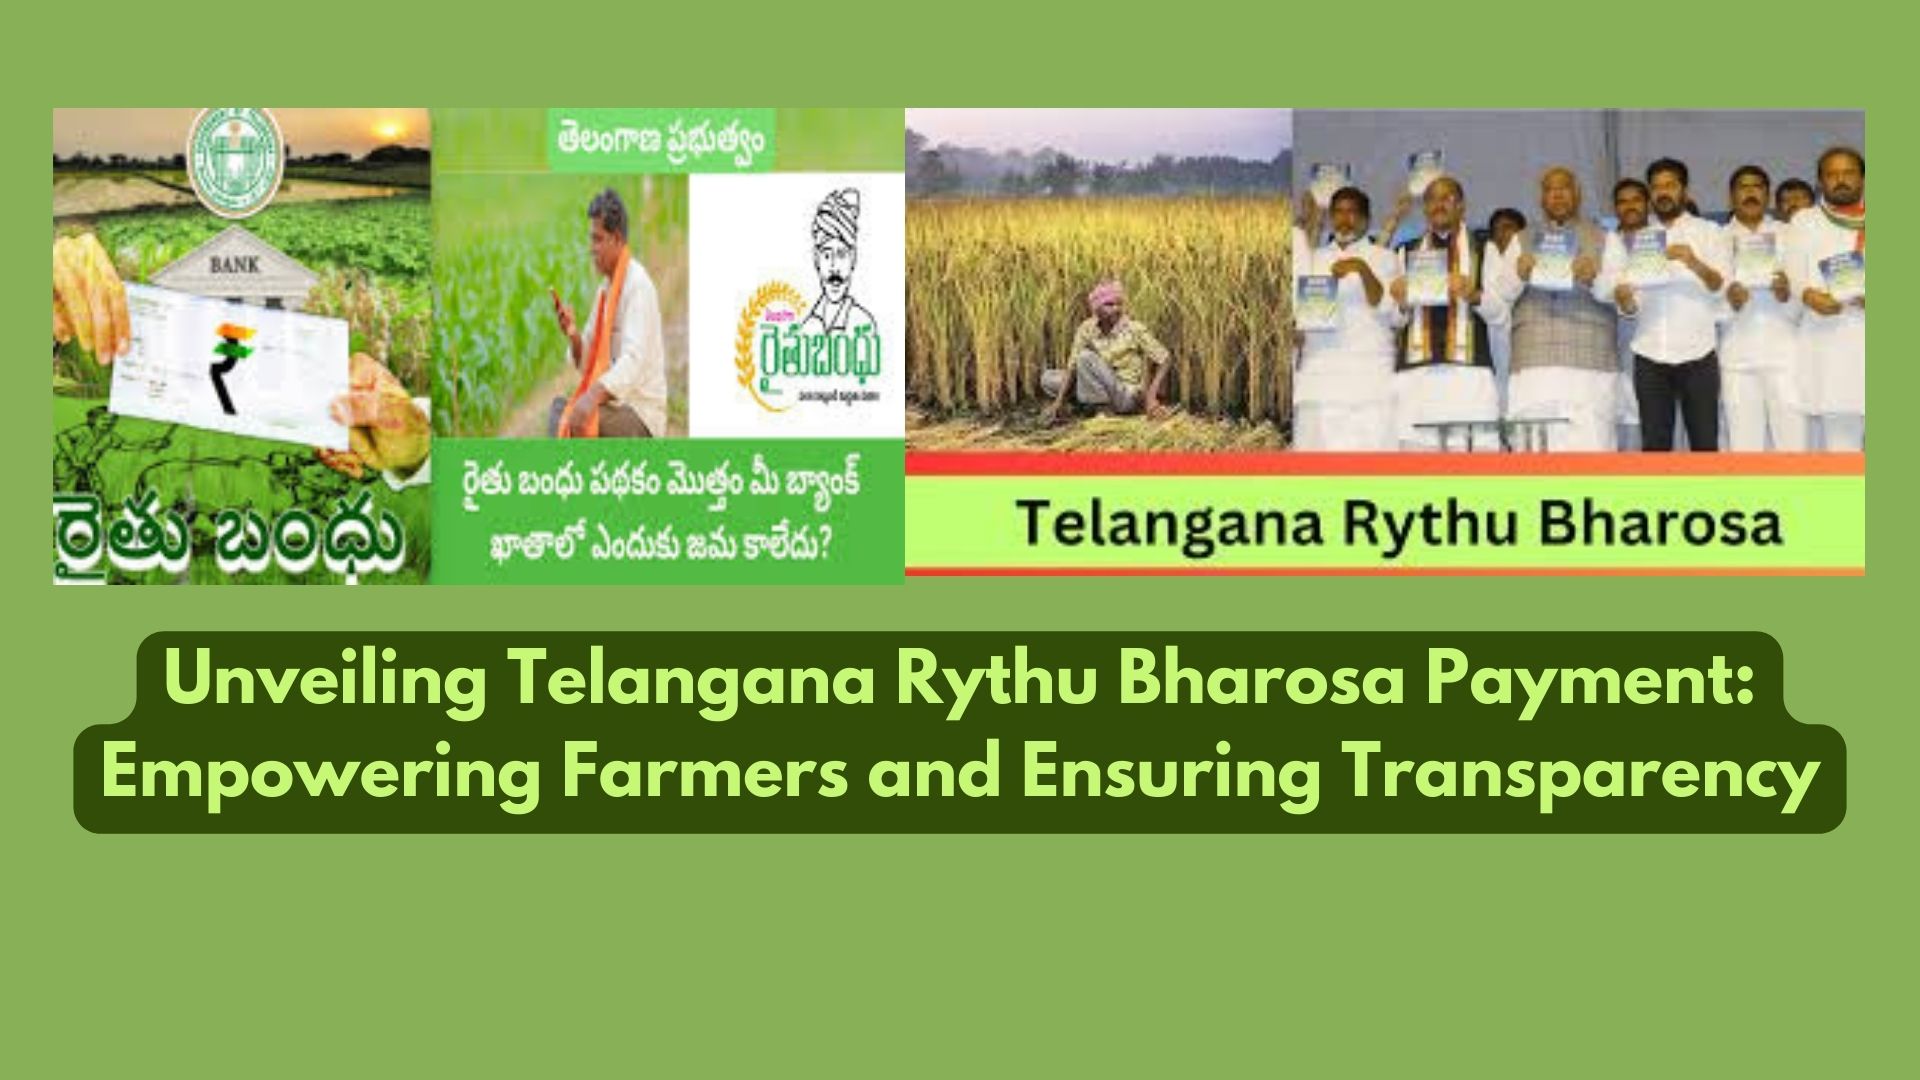 Unveiling Telangana Rythu Bharosa Payment: Empowering Farmers and Ensuring Transparency